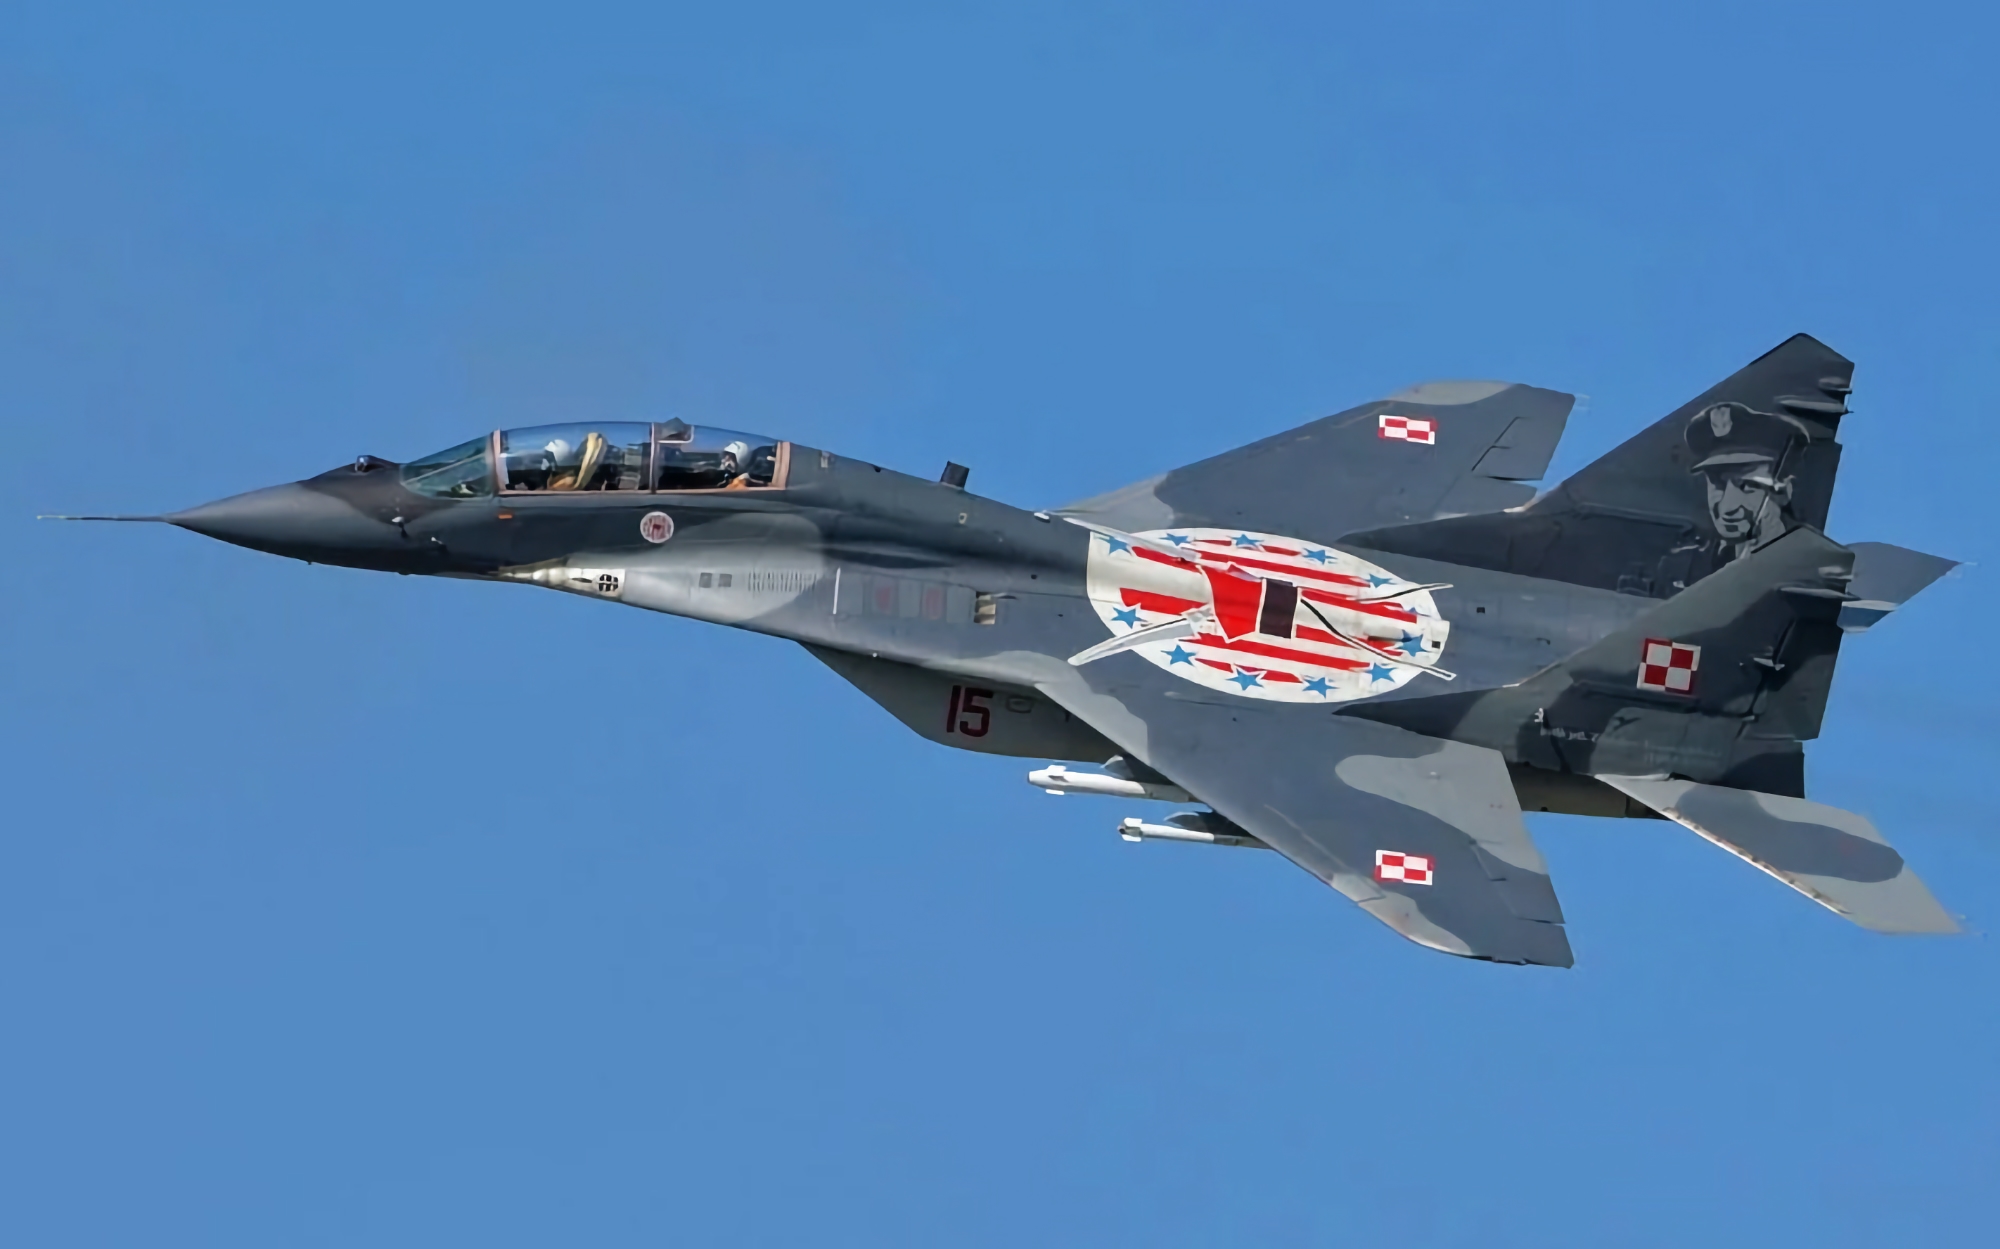 Poland will hand Ukraine first batch of MiG-29 fighters in coming days